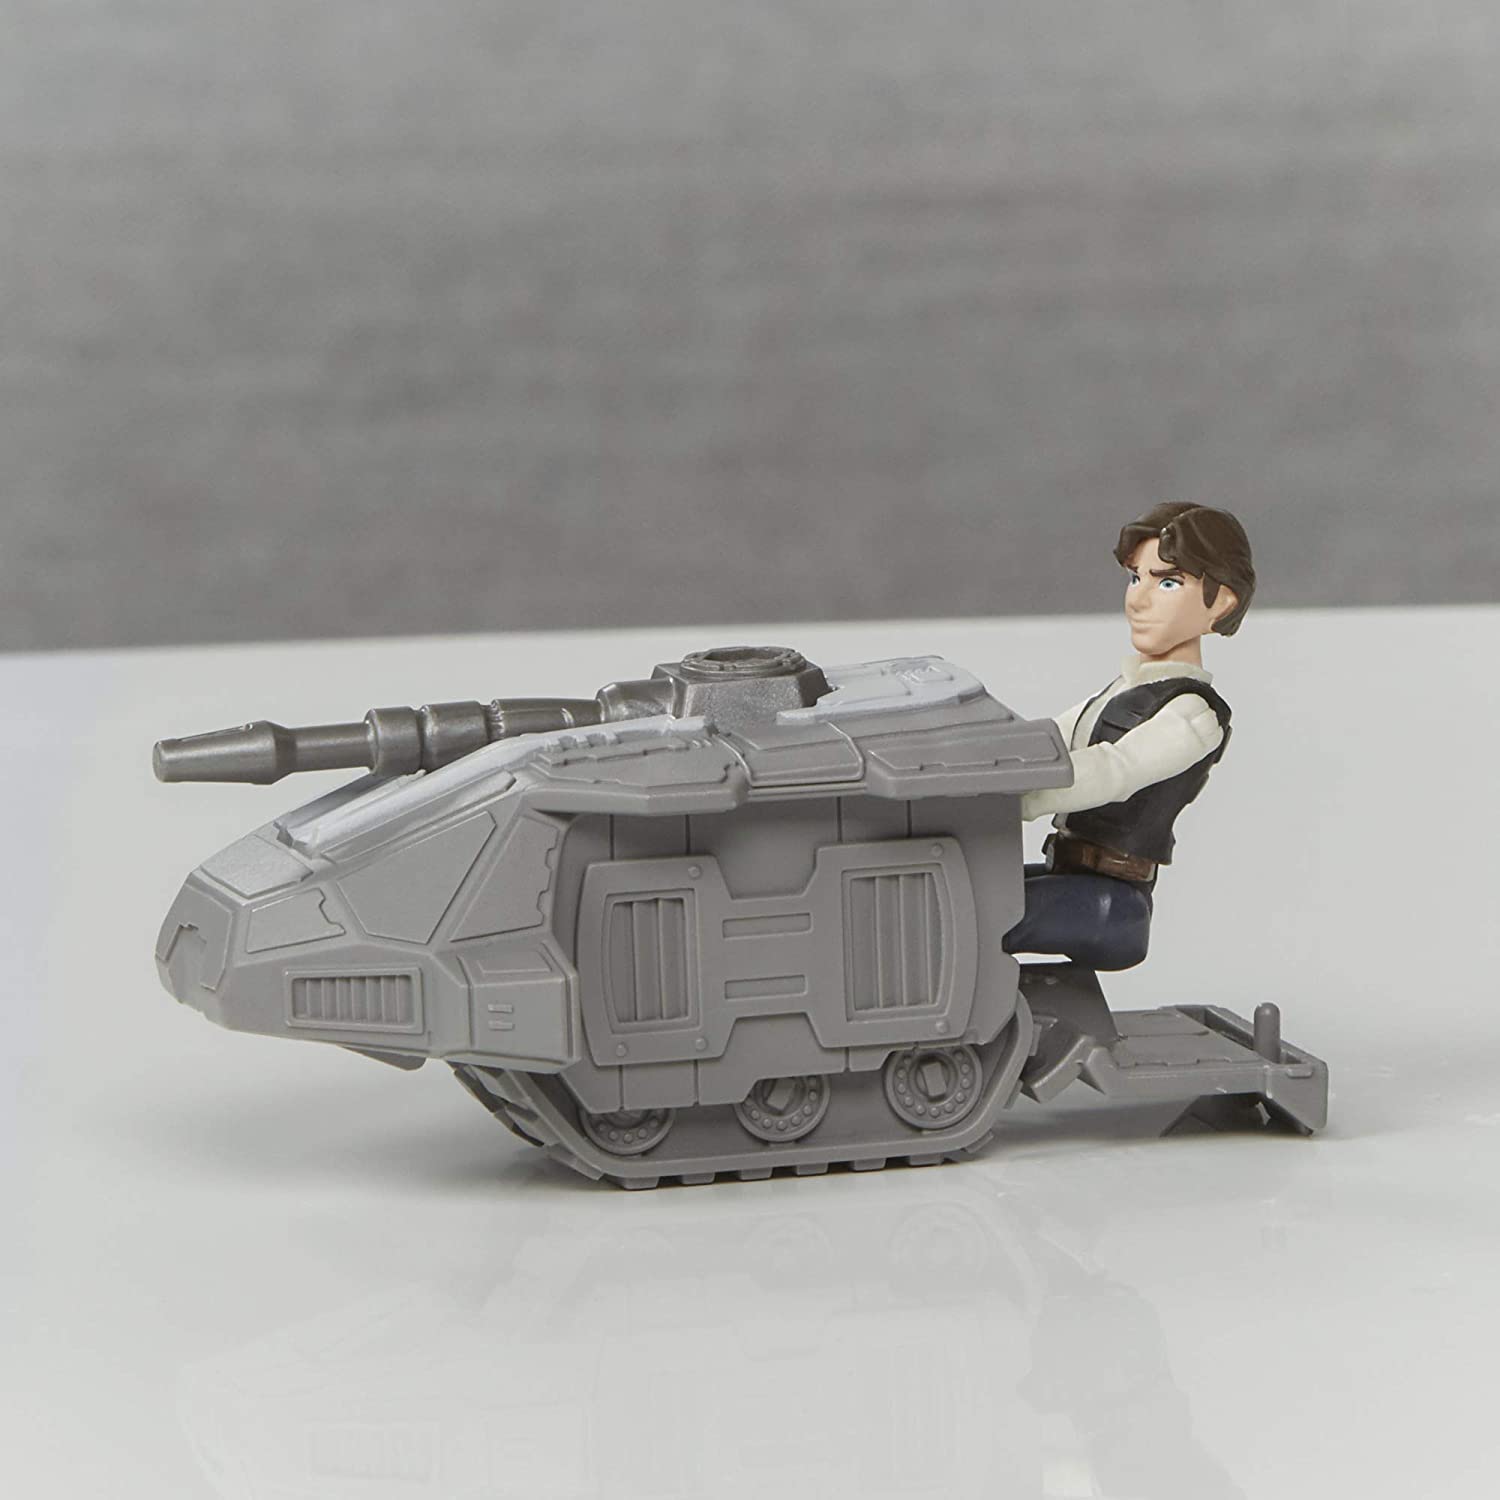 Star Wars Mission Fleet Han Solo Millennium Falcon 2.5-Inch-Scale Figure And Vehicle, Toys For Kids Ages 4 And Up -  - The Hooded Goblin